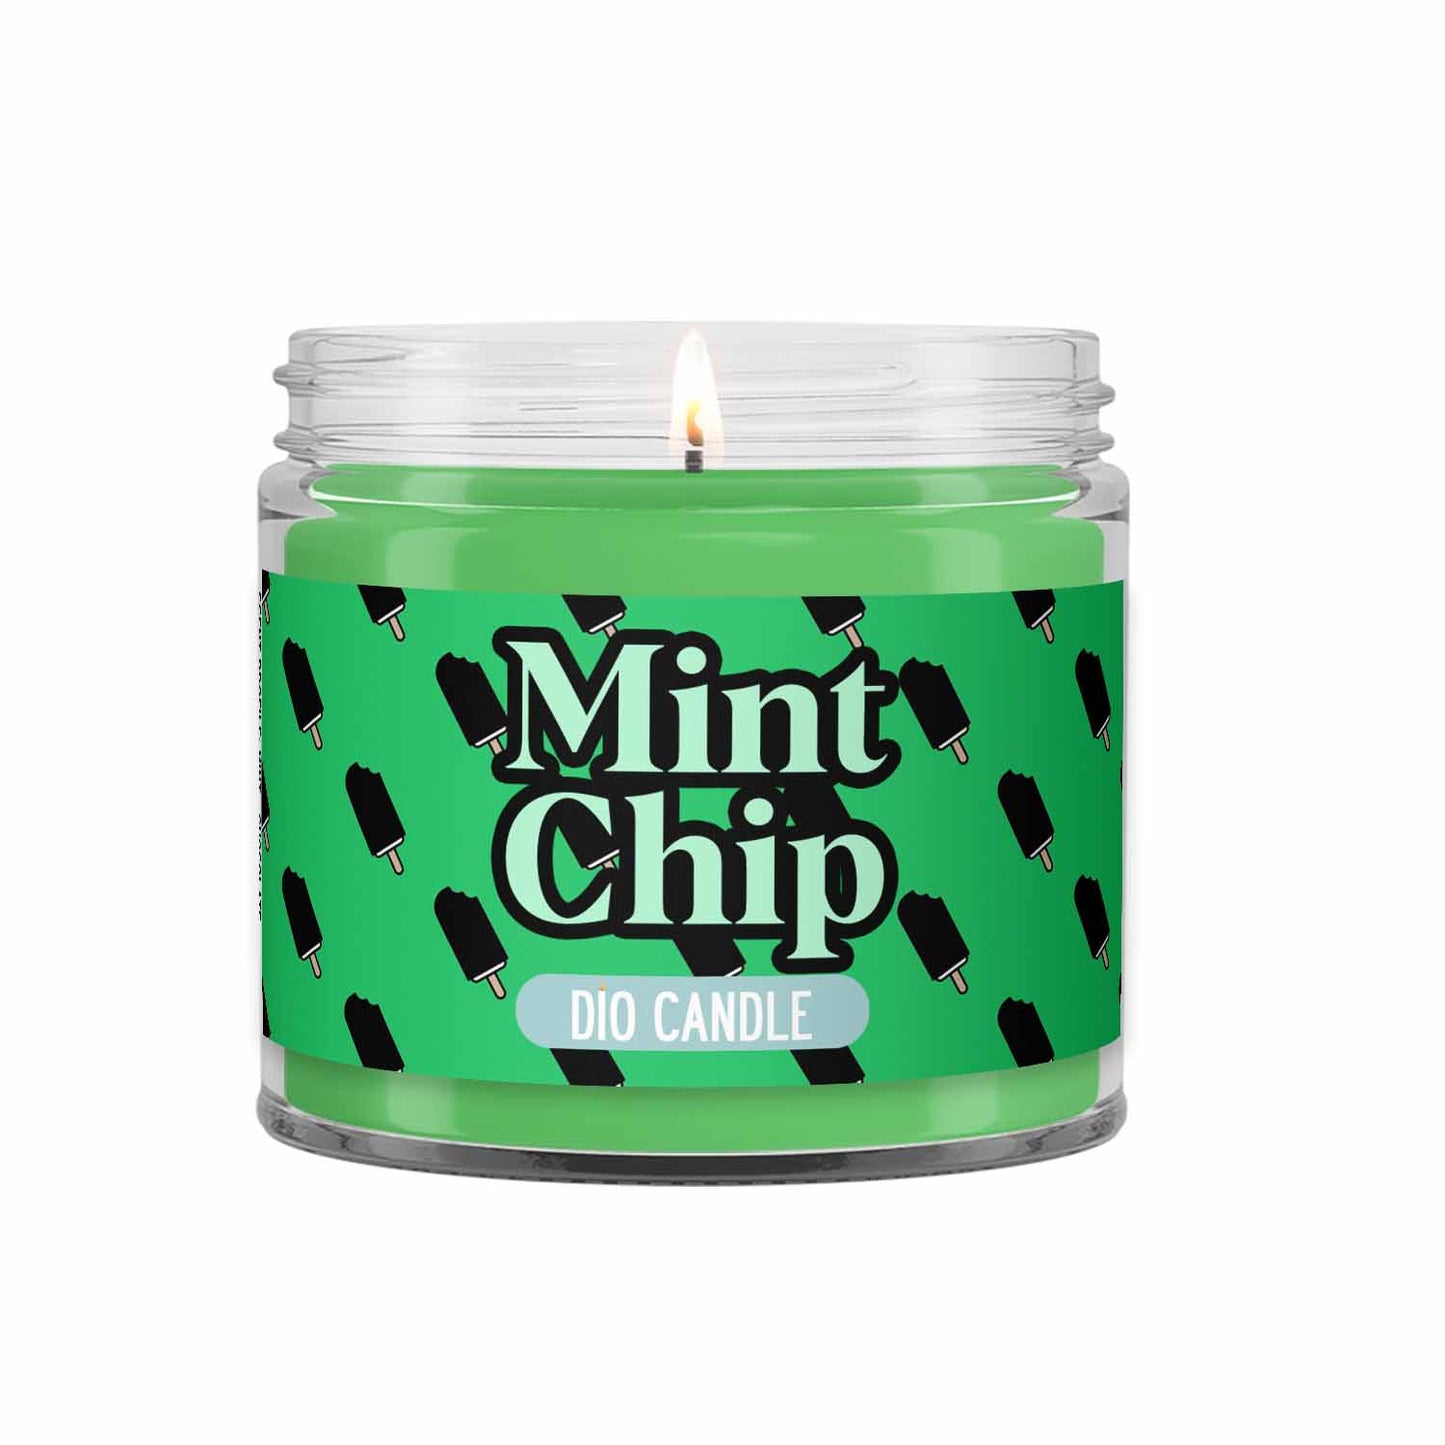 Mint Chip Ice Cream Candle